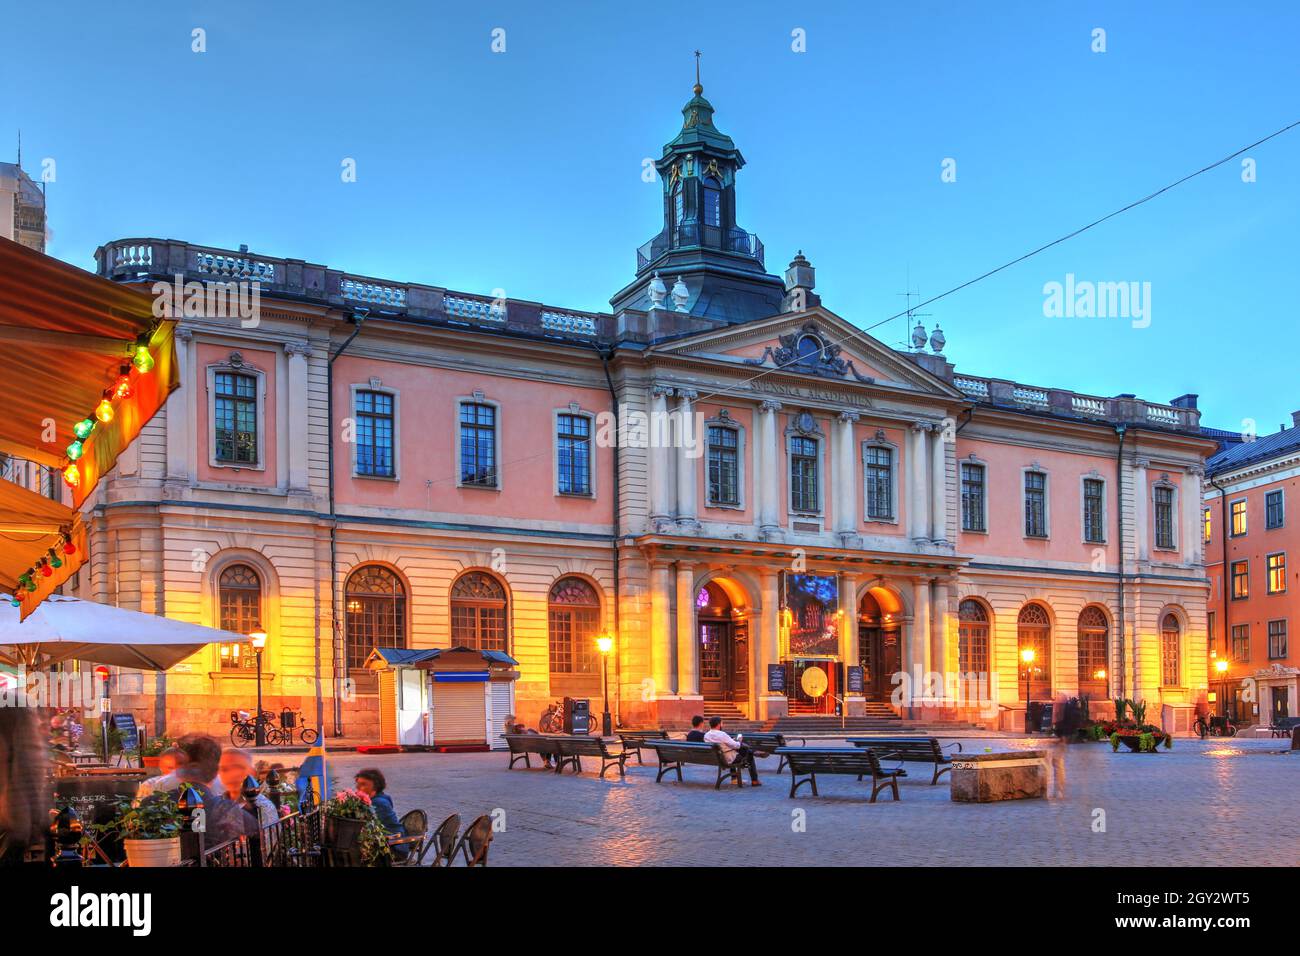 Nobel Prize Museum is located in Stortorget (Grand Square) in Gamla Stan (Old Town) of Stockholm, Sweden. The building, previously the Stock Exchange Stock Photo